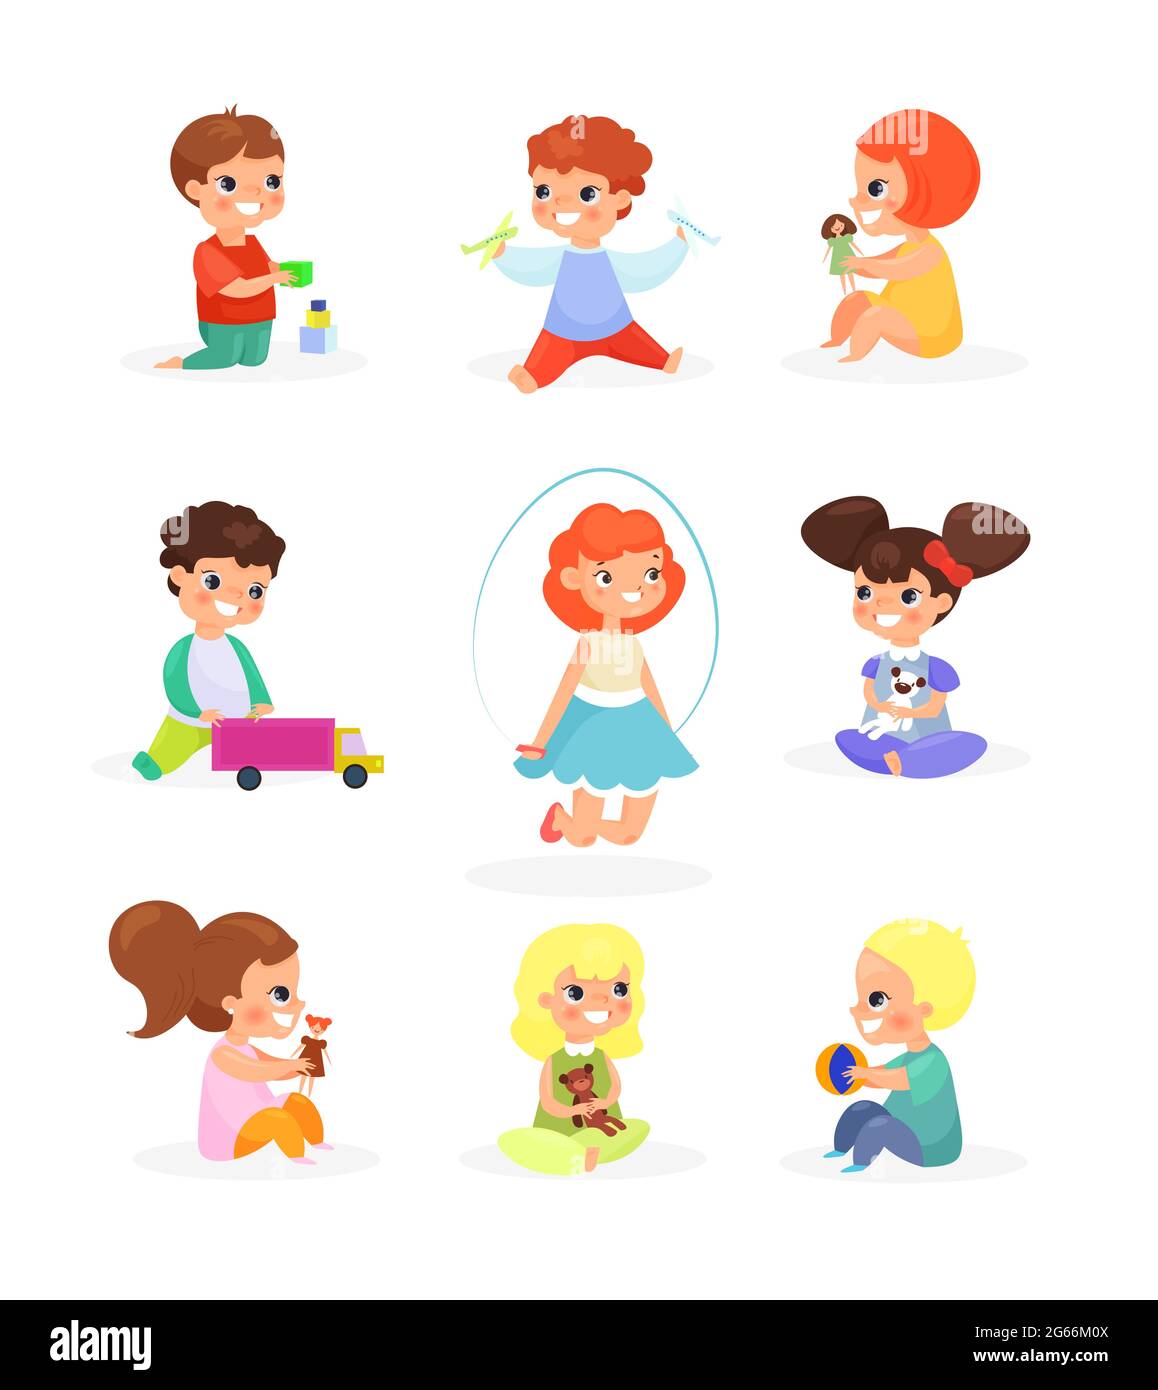 Vector illustration set of cute kids playing with toys, dolls, jumping, smiling. Happy children having fun, cartoon flat style. Stock Vector